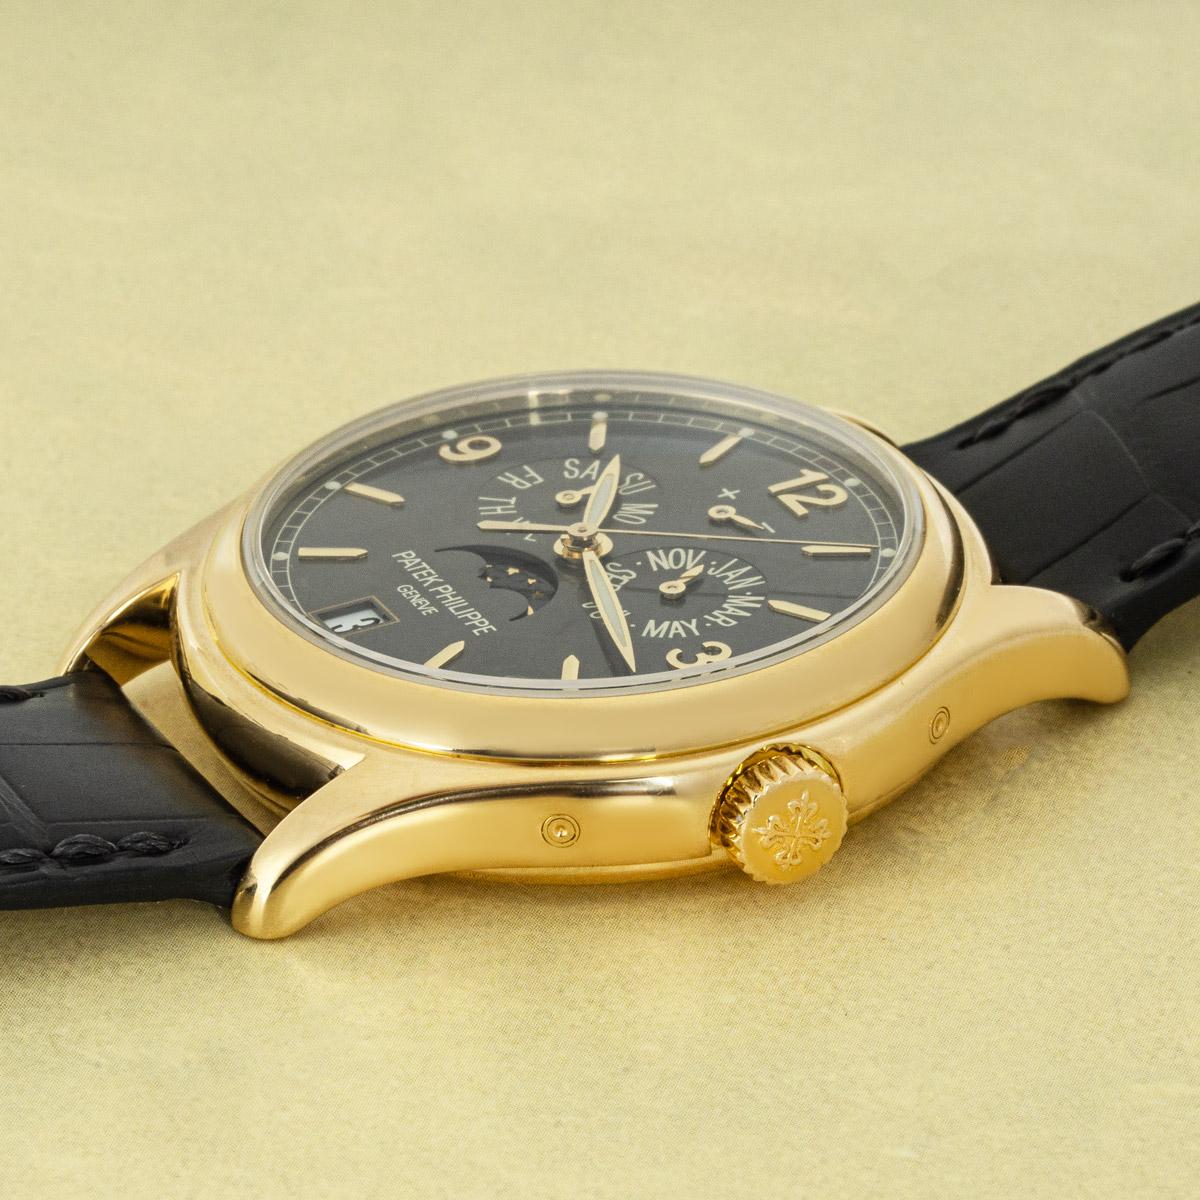 A 39mm Patek Philippe Annual Calendar in yellow gold. Featuring a grey dial with displays of the day, date and month. The dial also features a moon phase display and power reserve indicator encased by a yellow gold bezel.

Fitted with sapphire glass